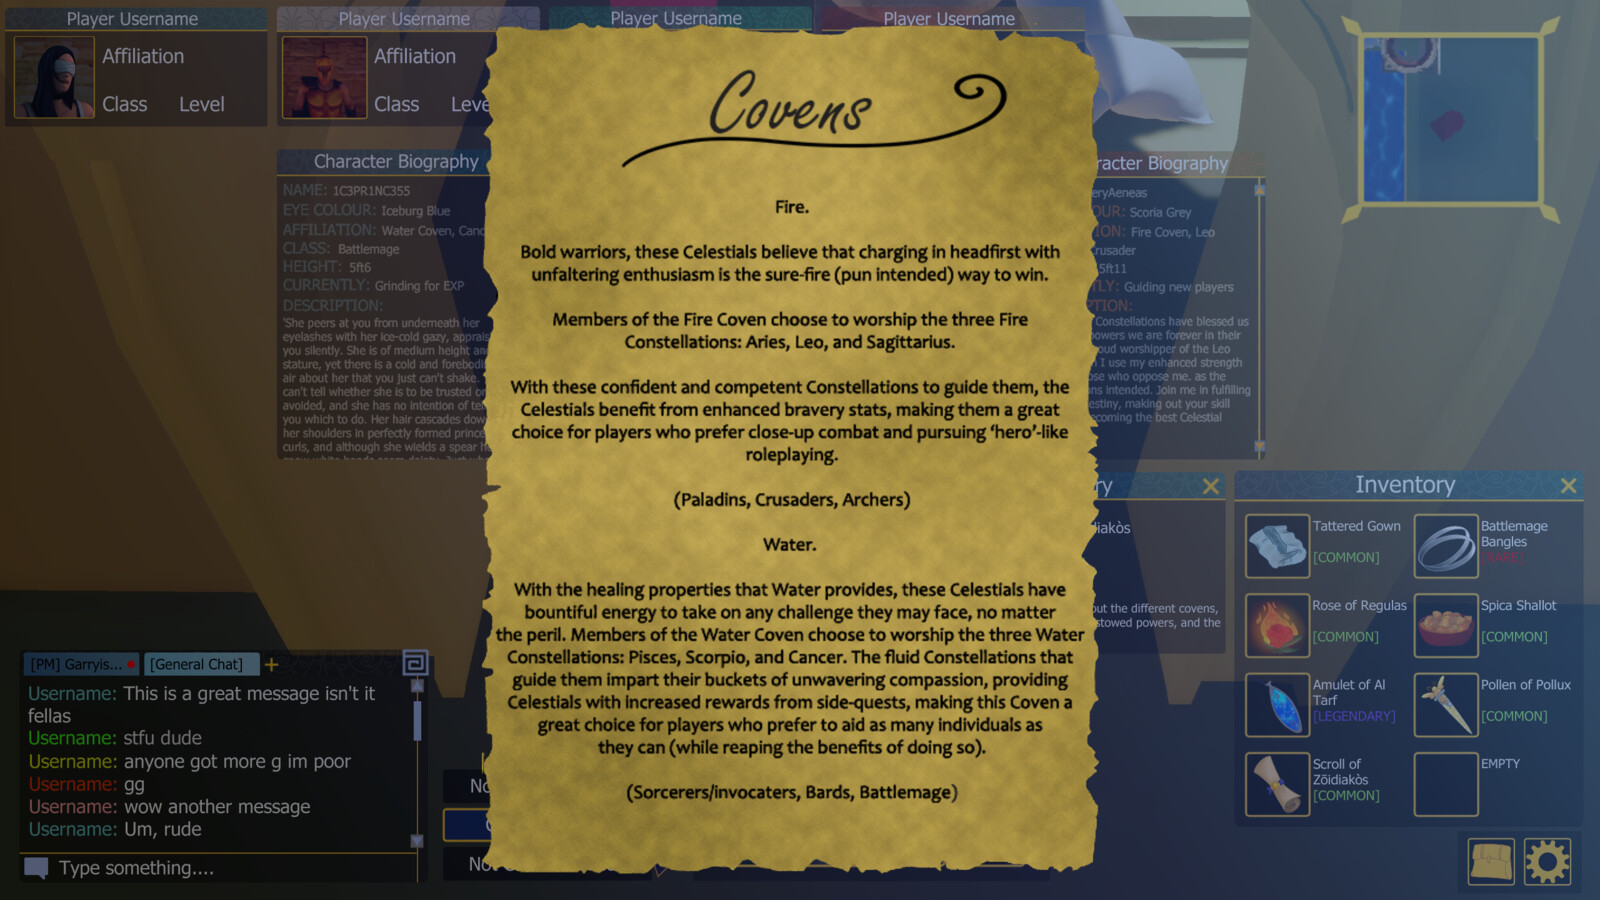 Scroll pop-up that would appear when the player clicks on the Scroll of Zōidiakòs icon. This features all the lore I wrote for the game to elaborate on the context for all players who are interested. 